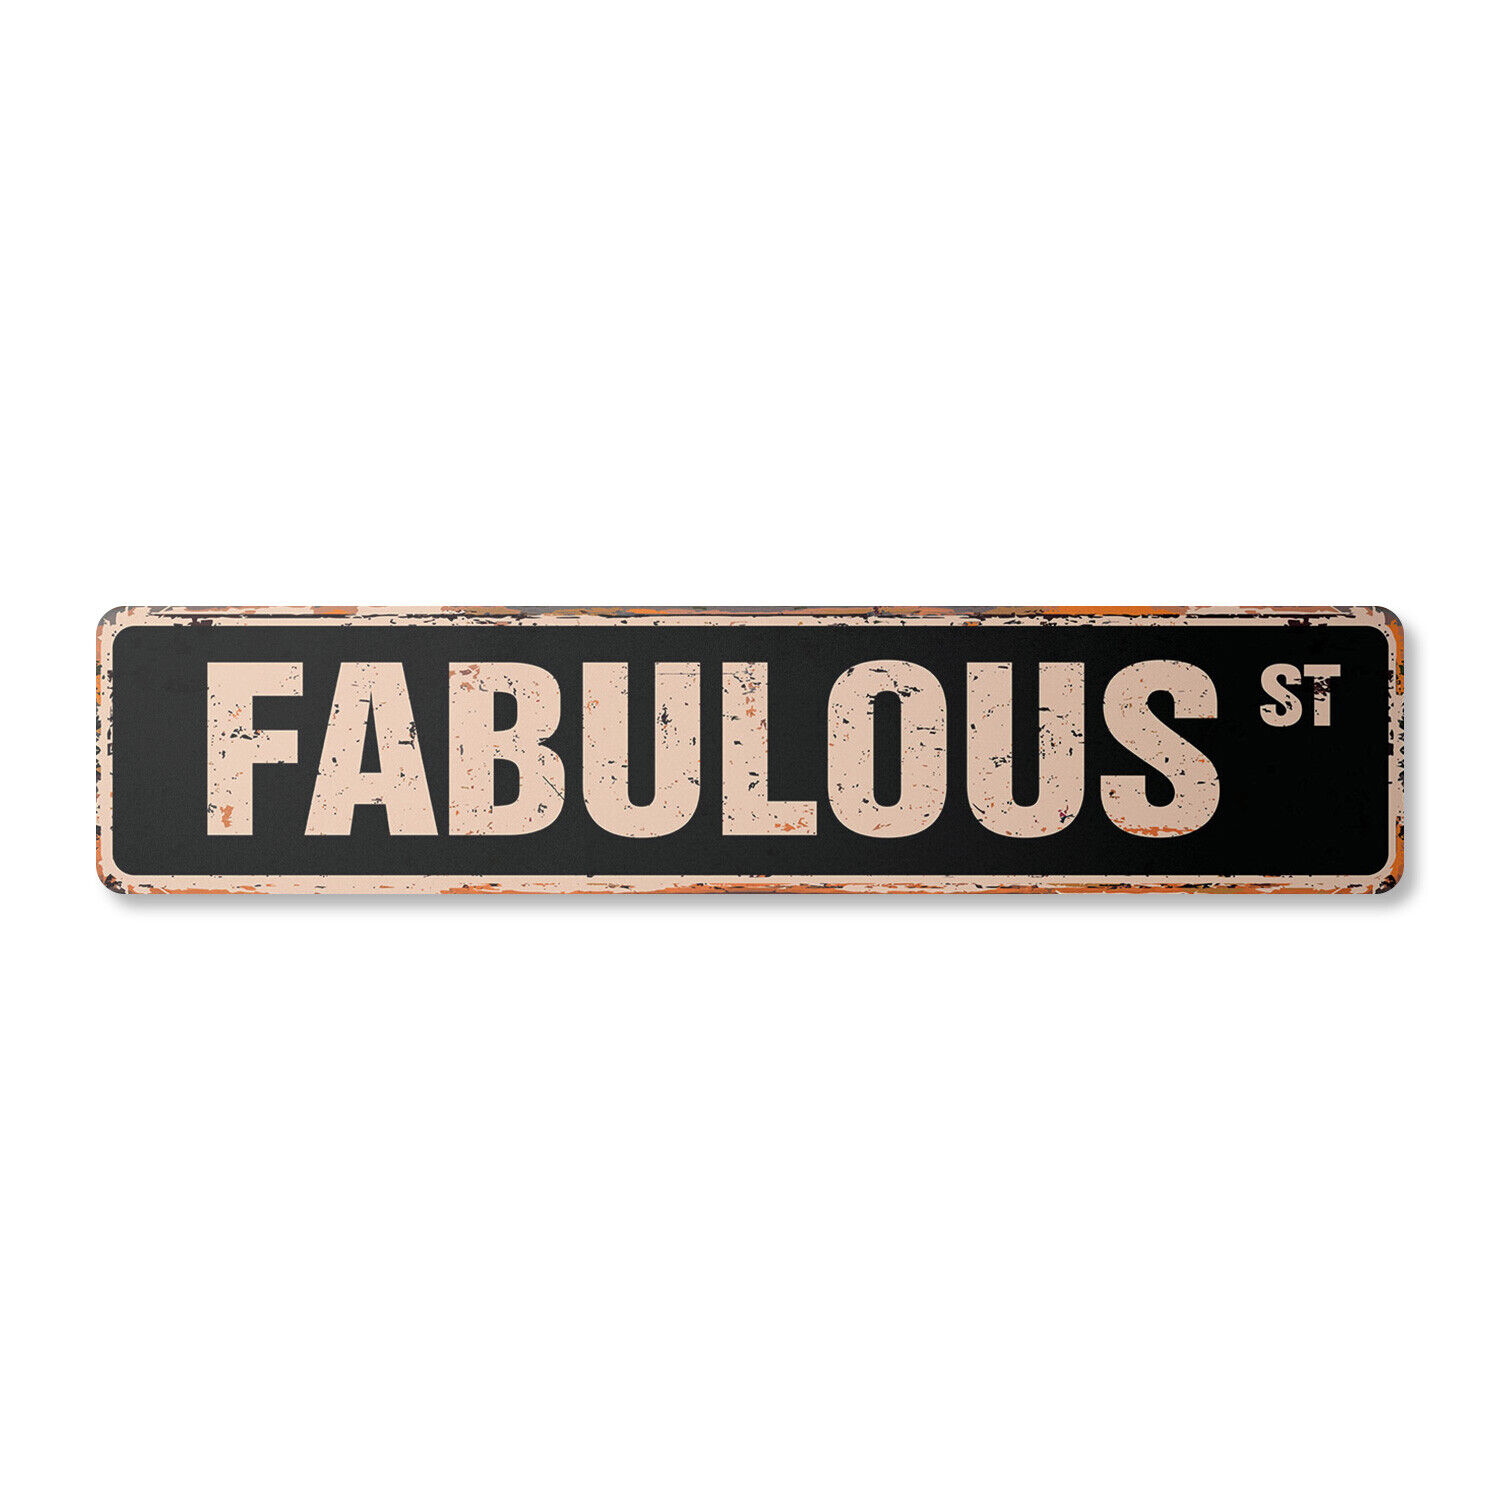 FABULOUS Vintage Street Sign amazing great best exceptionally marvelous